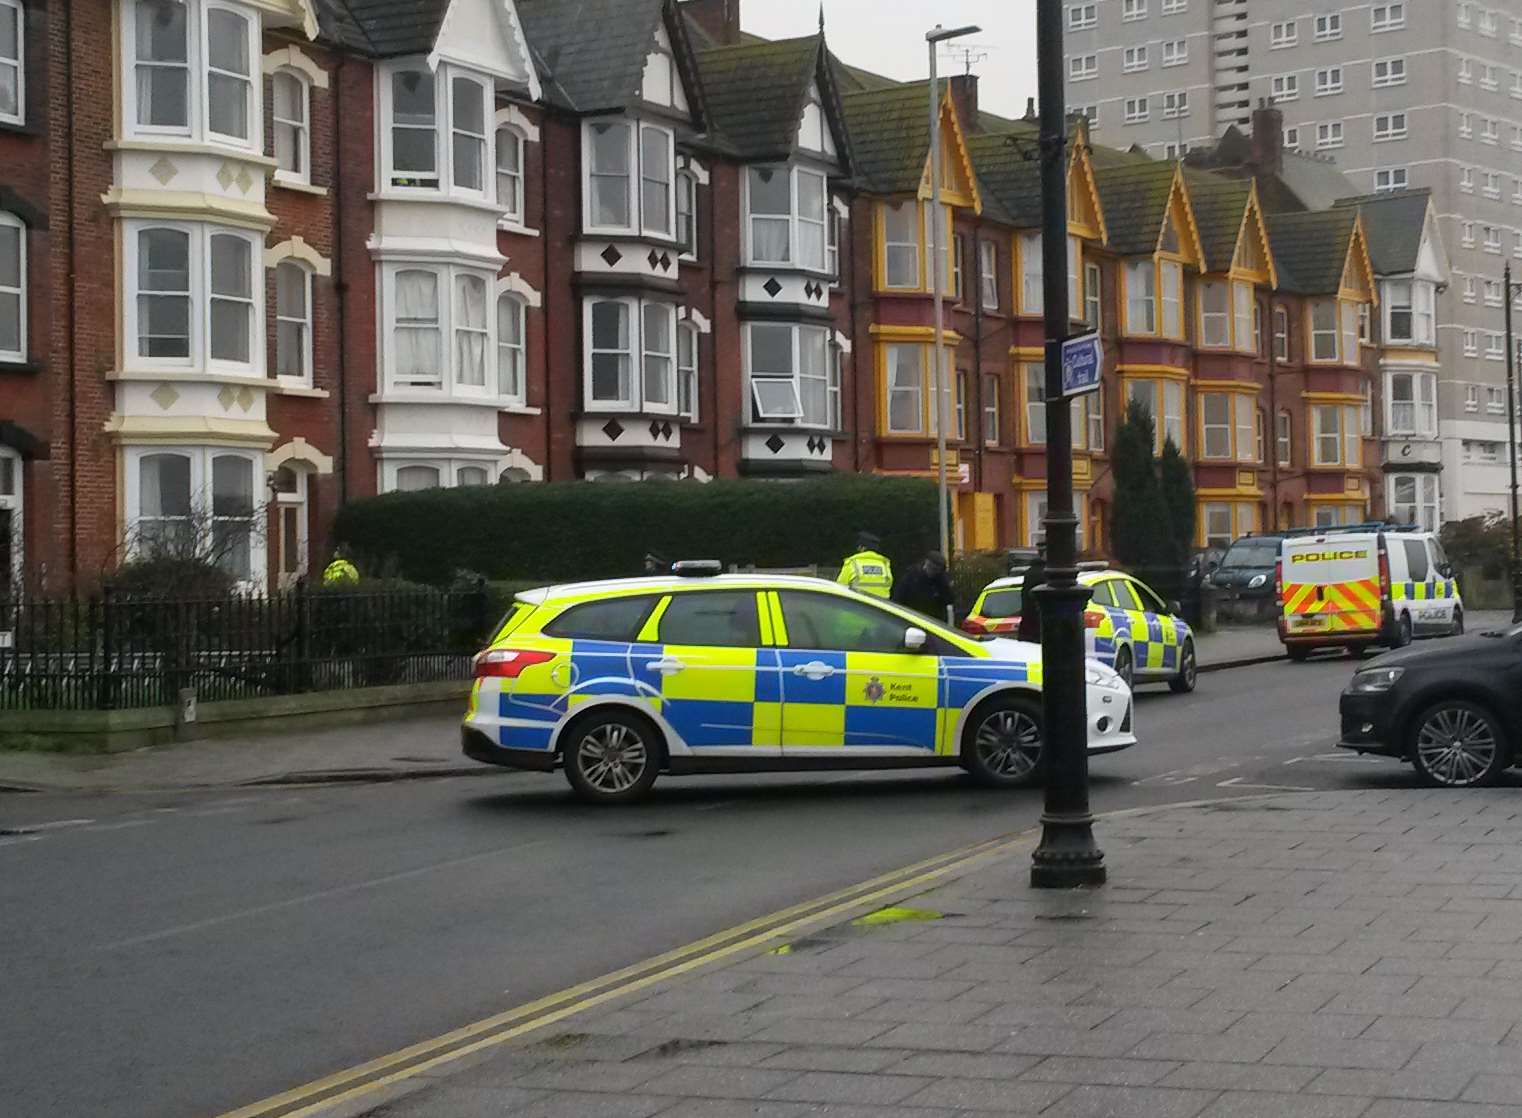 Six police cars have been at the incident in Herne Bay